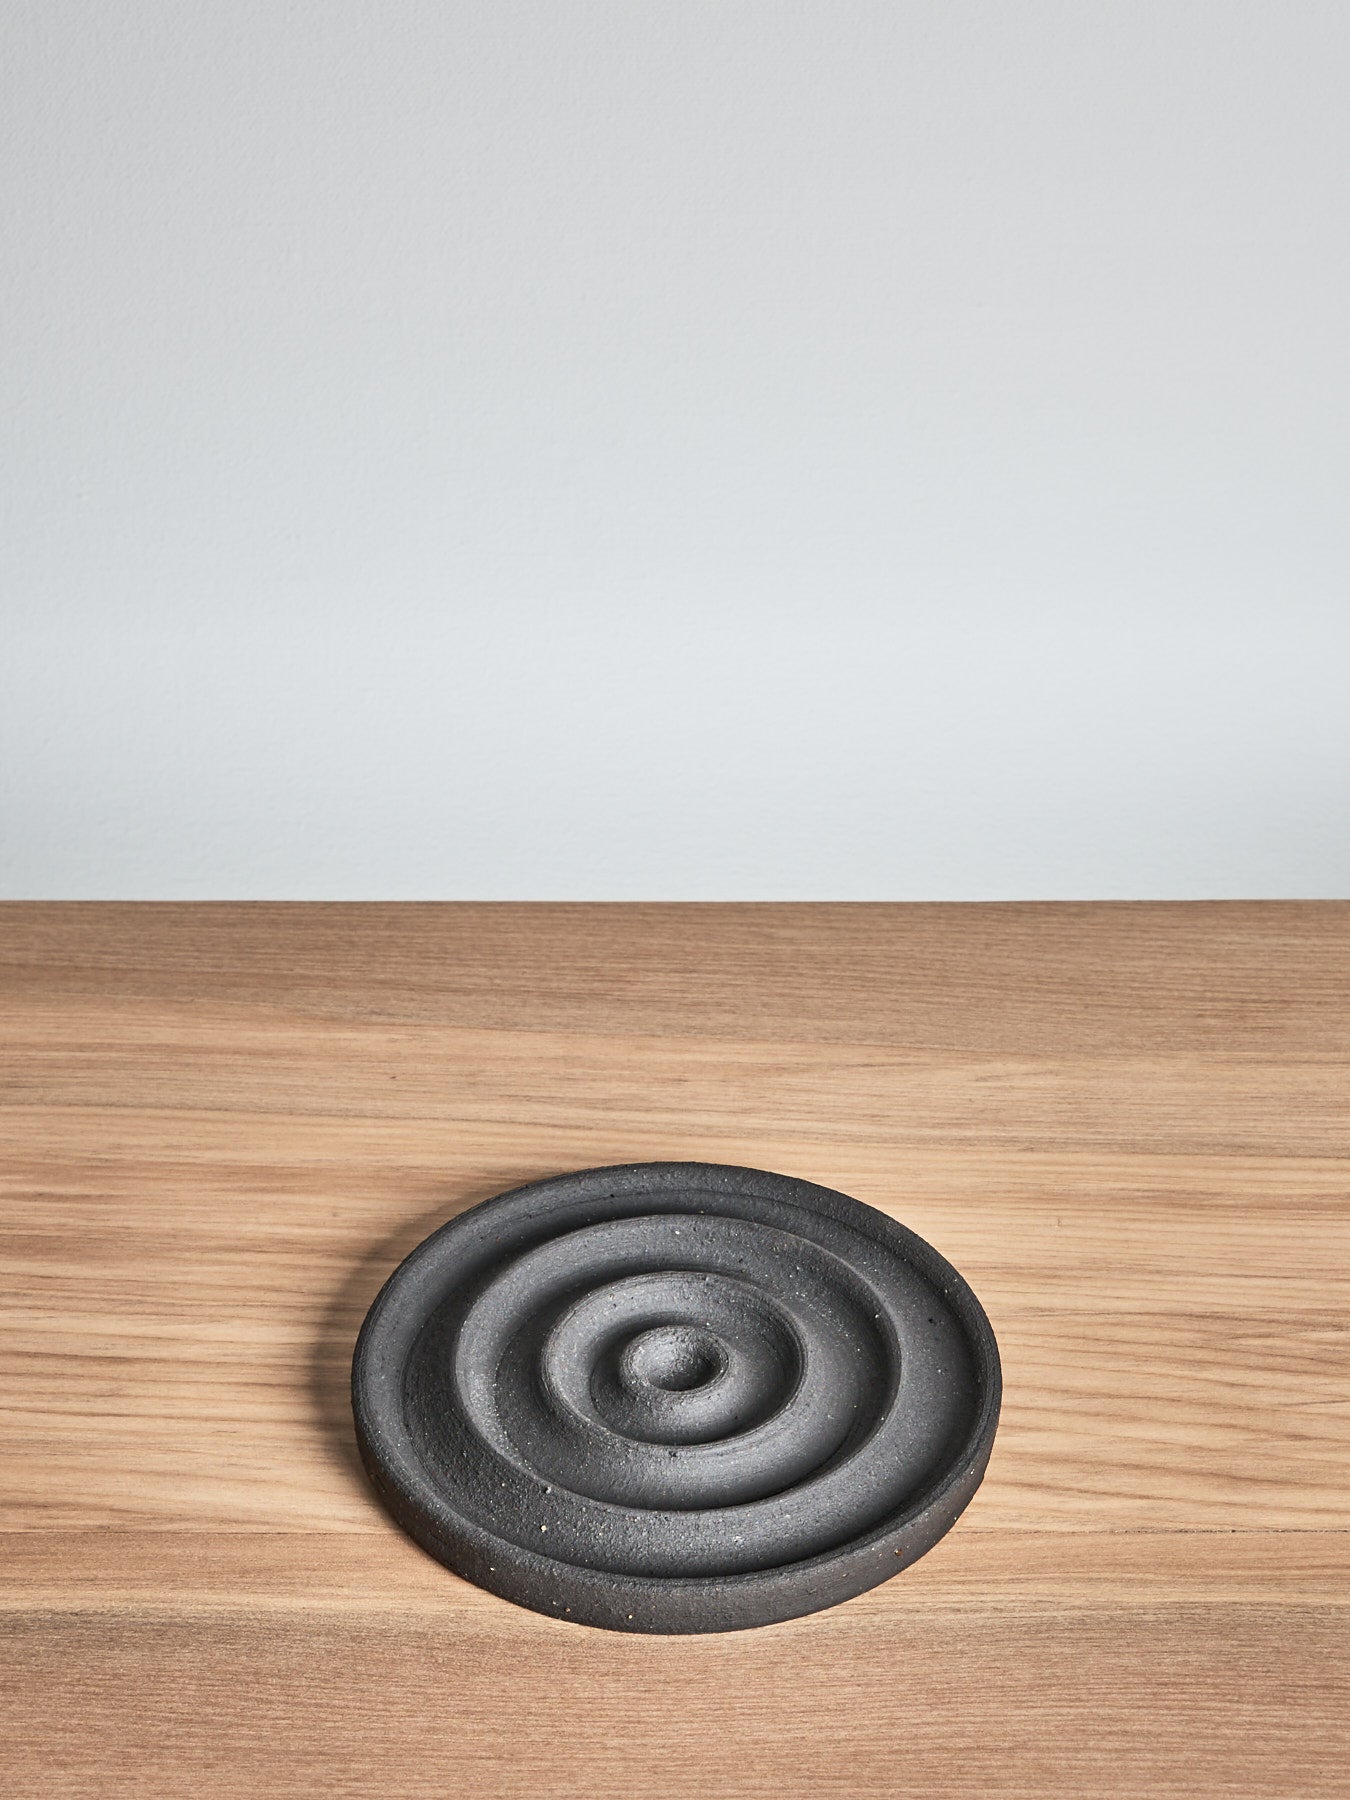 A Soap Dish – Black by deborah sweeney on a wooden table.